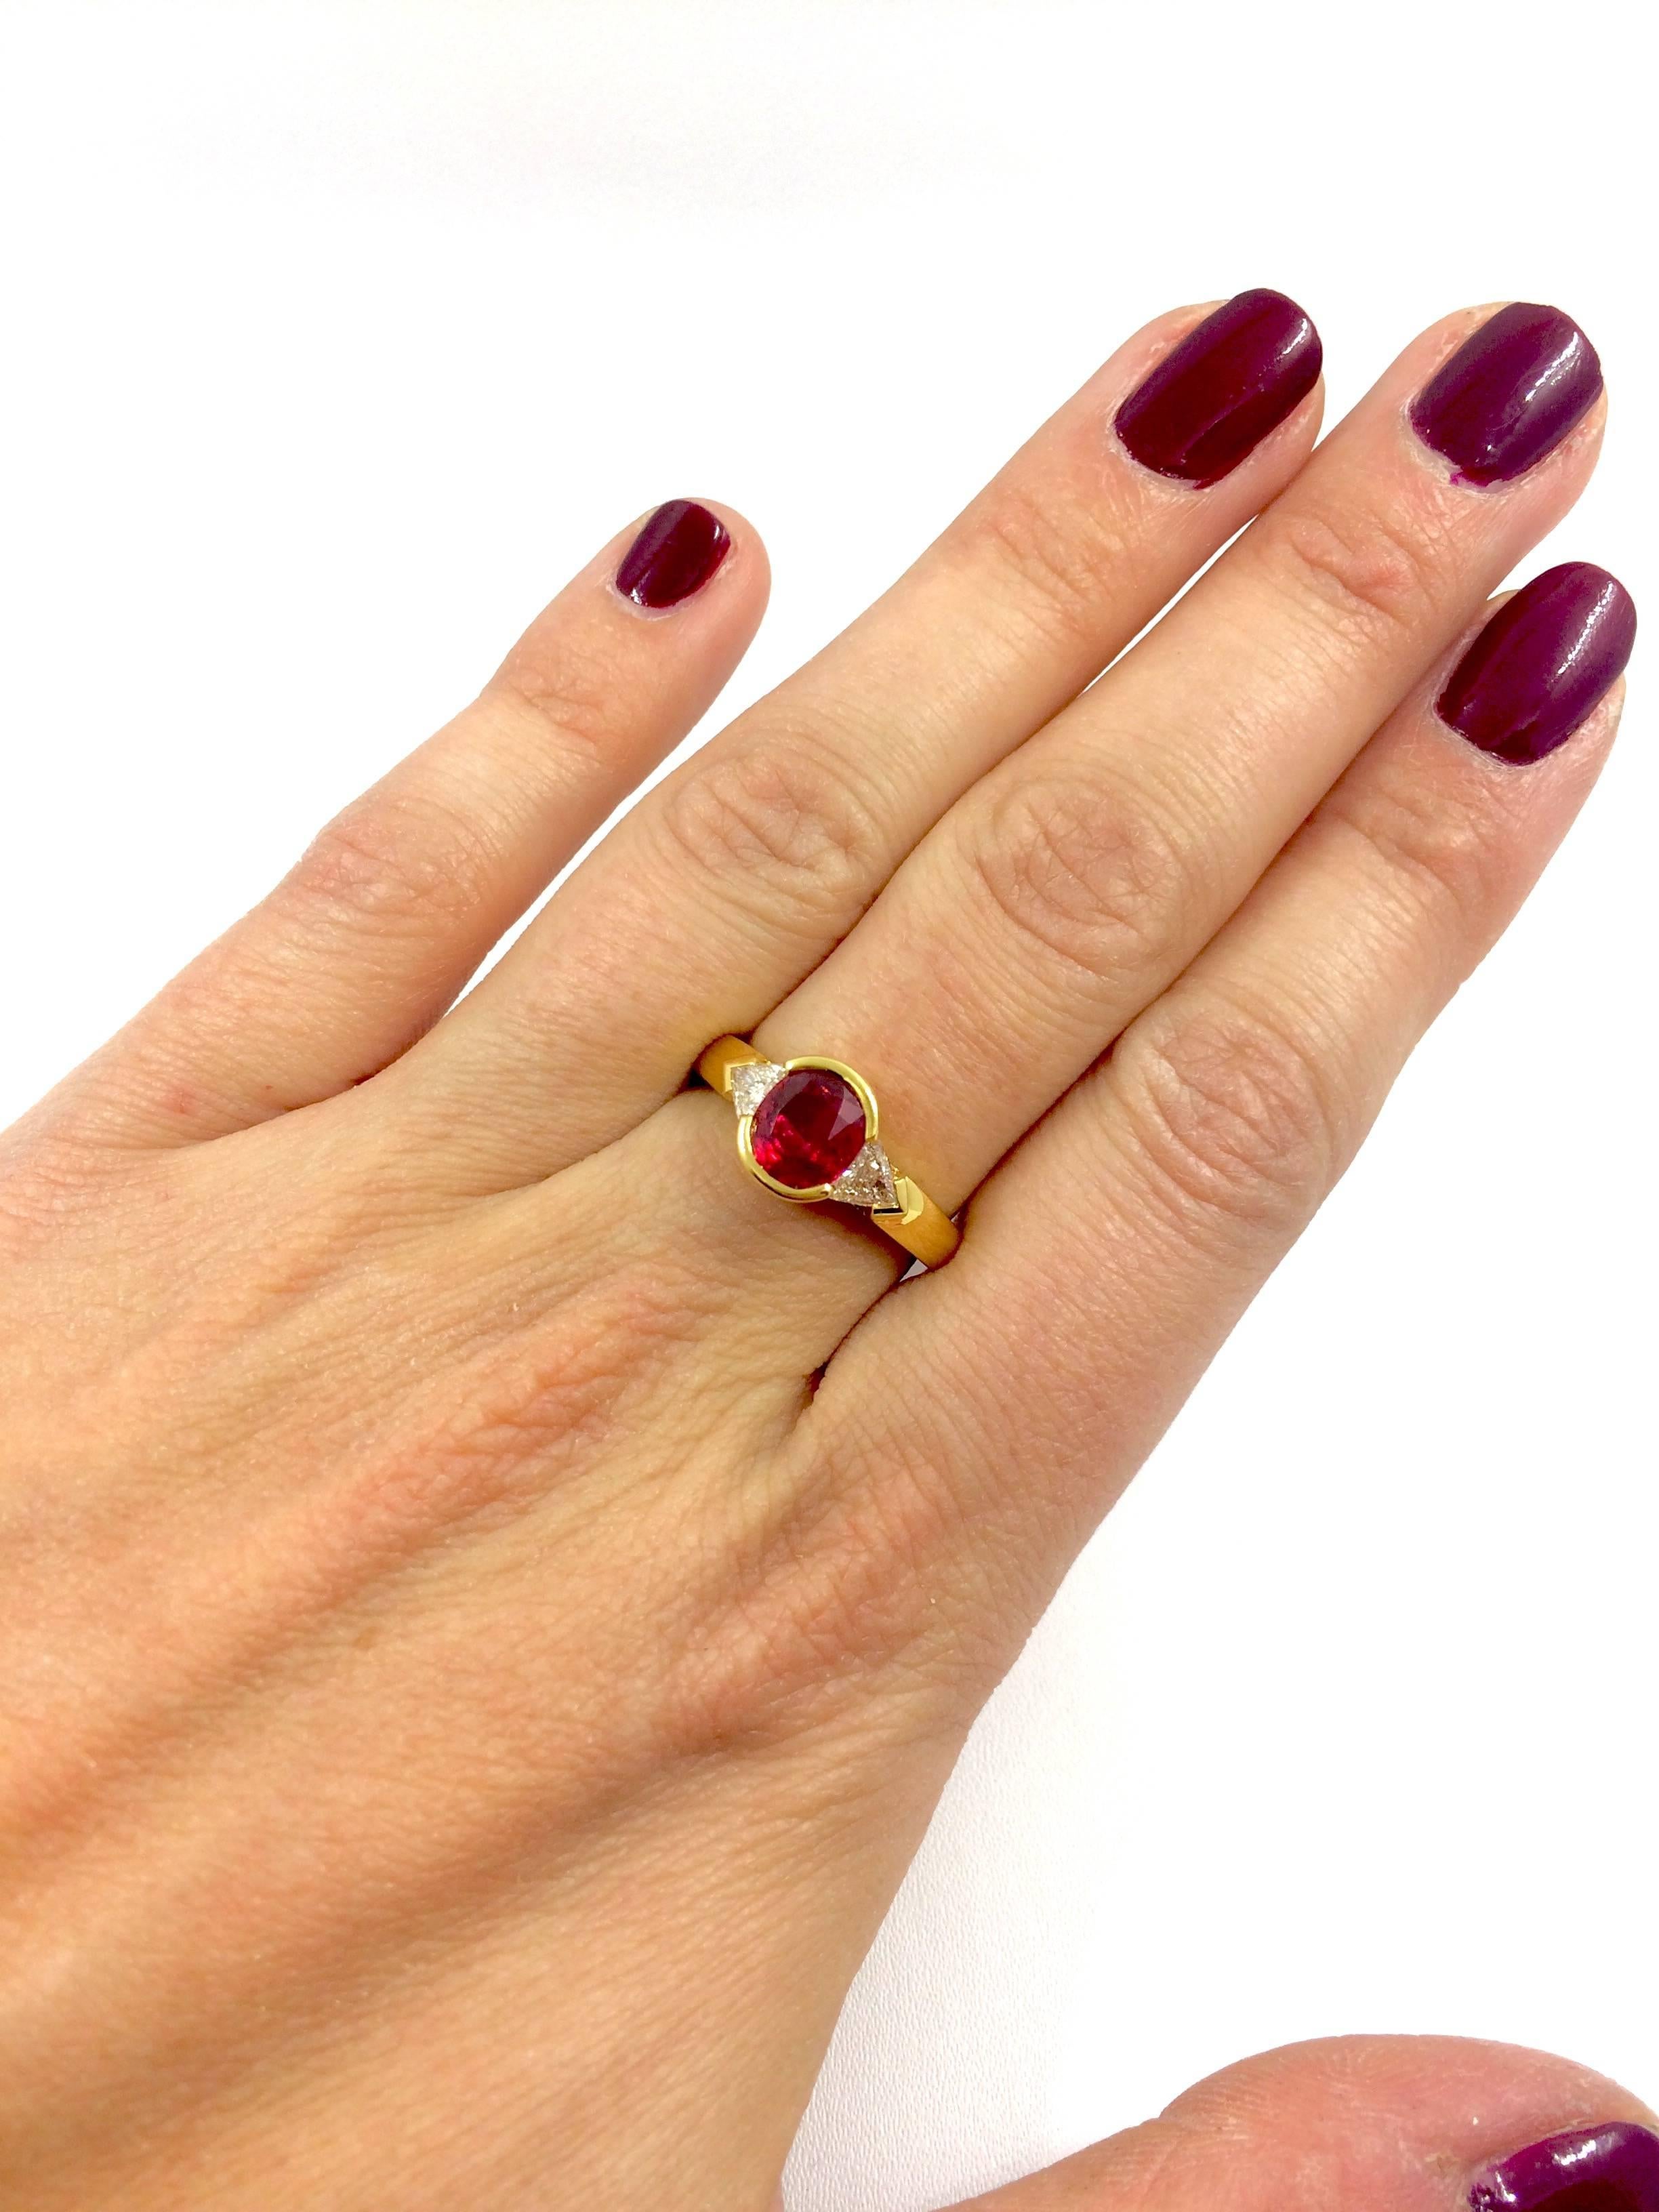 A yellow gold ring set in the middle with an exceptionnal Burma Ruby surrounded by a trillion cut diamond on each side.
Ruby Weight: 1.61 carat
Total Diamonds Weight: 0.40 carat
Diamonds Quality: F/VS
Finger Size: 6.5 can be sized